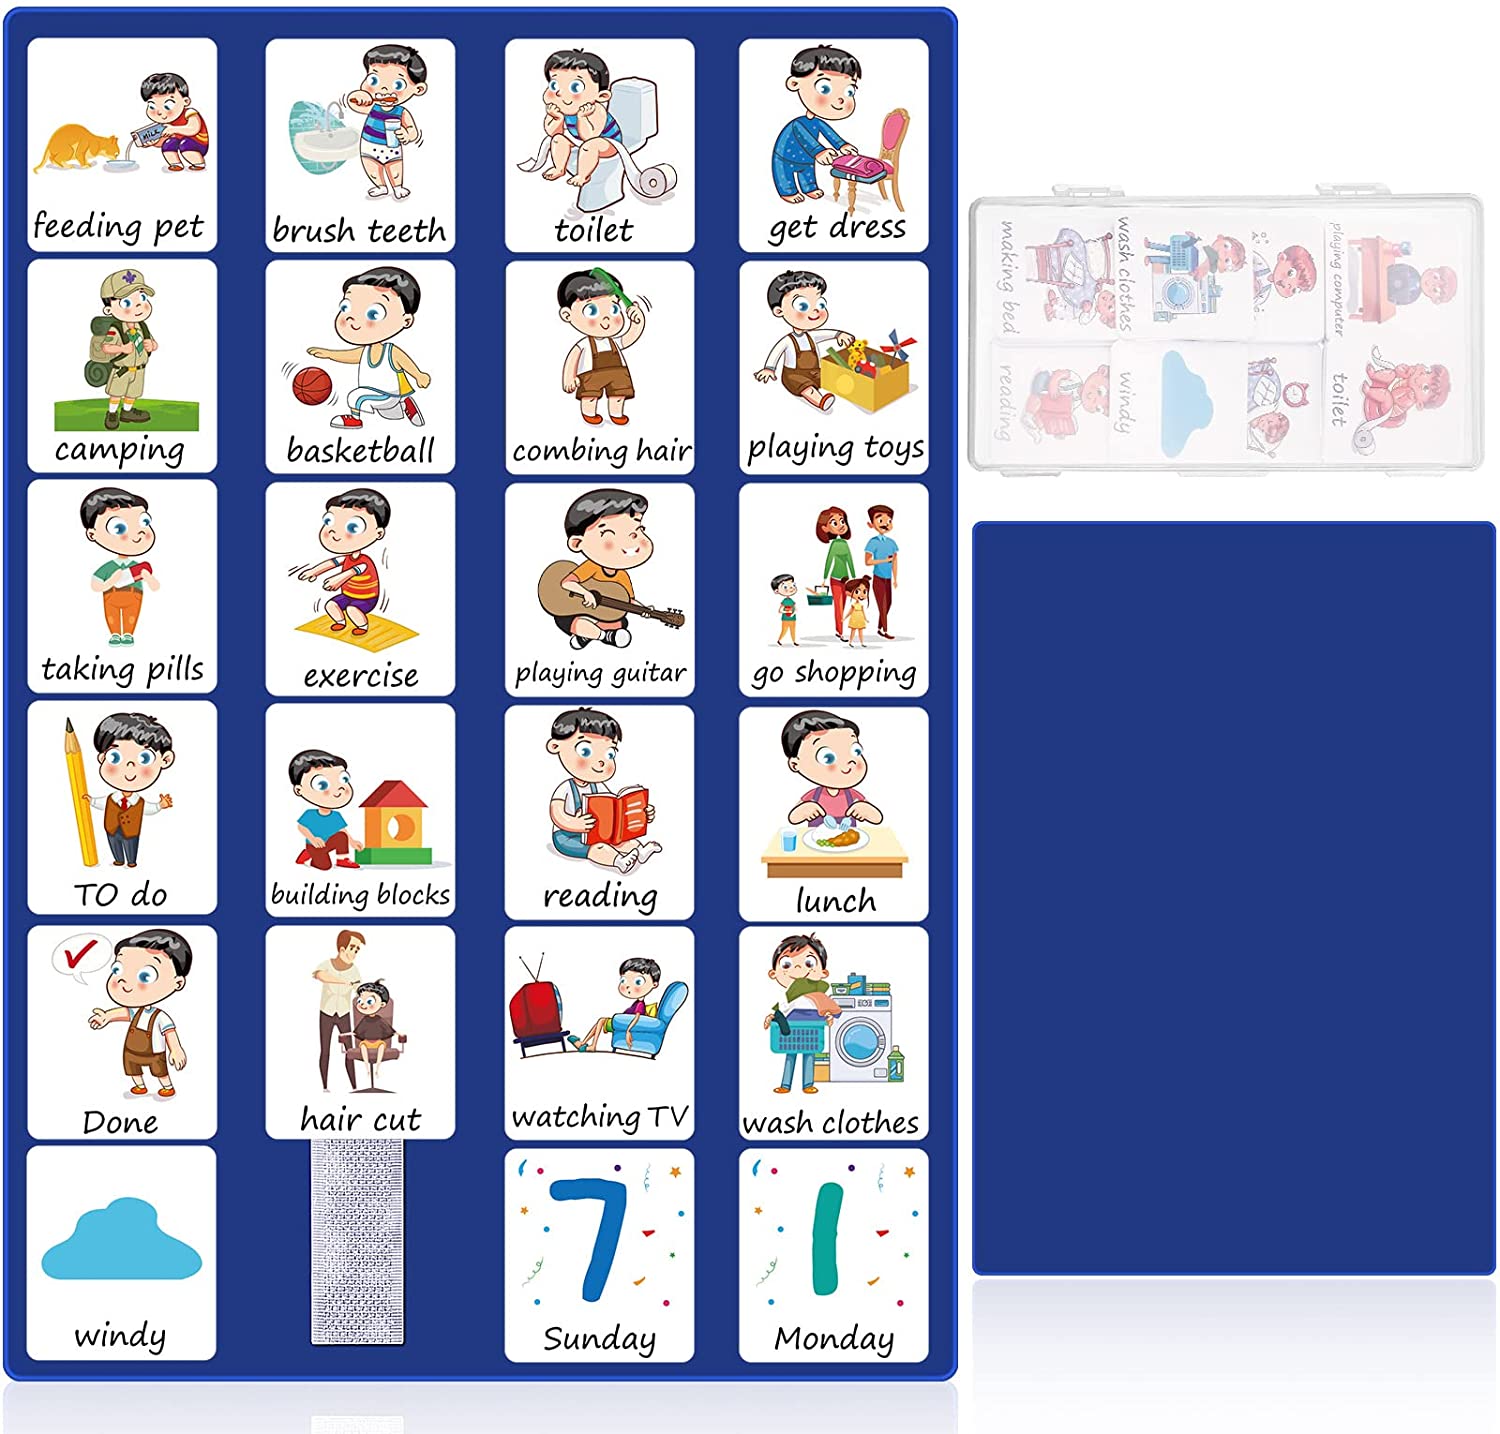 Monthly Calendar Schedule Visual Support for ASD/ADHD/Autism/Visual Learners/SEN 